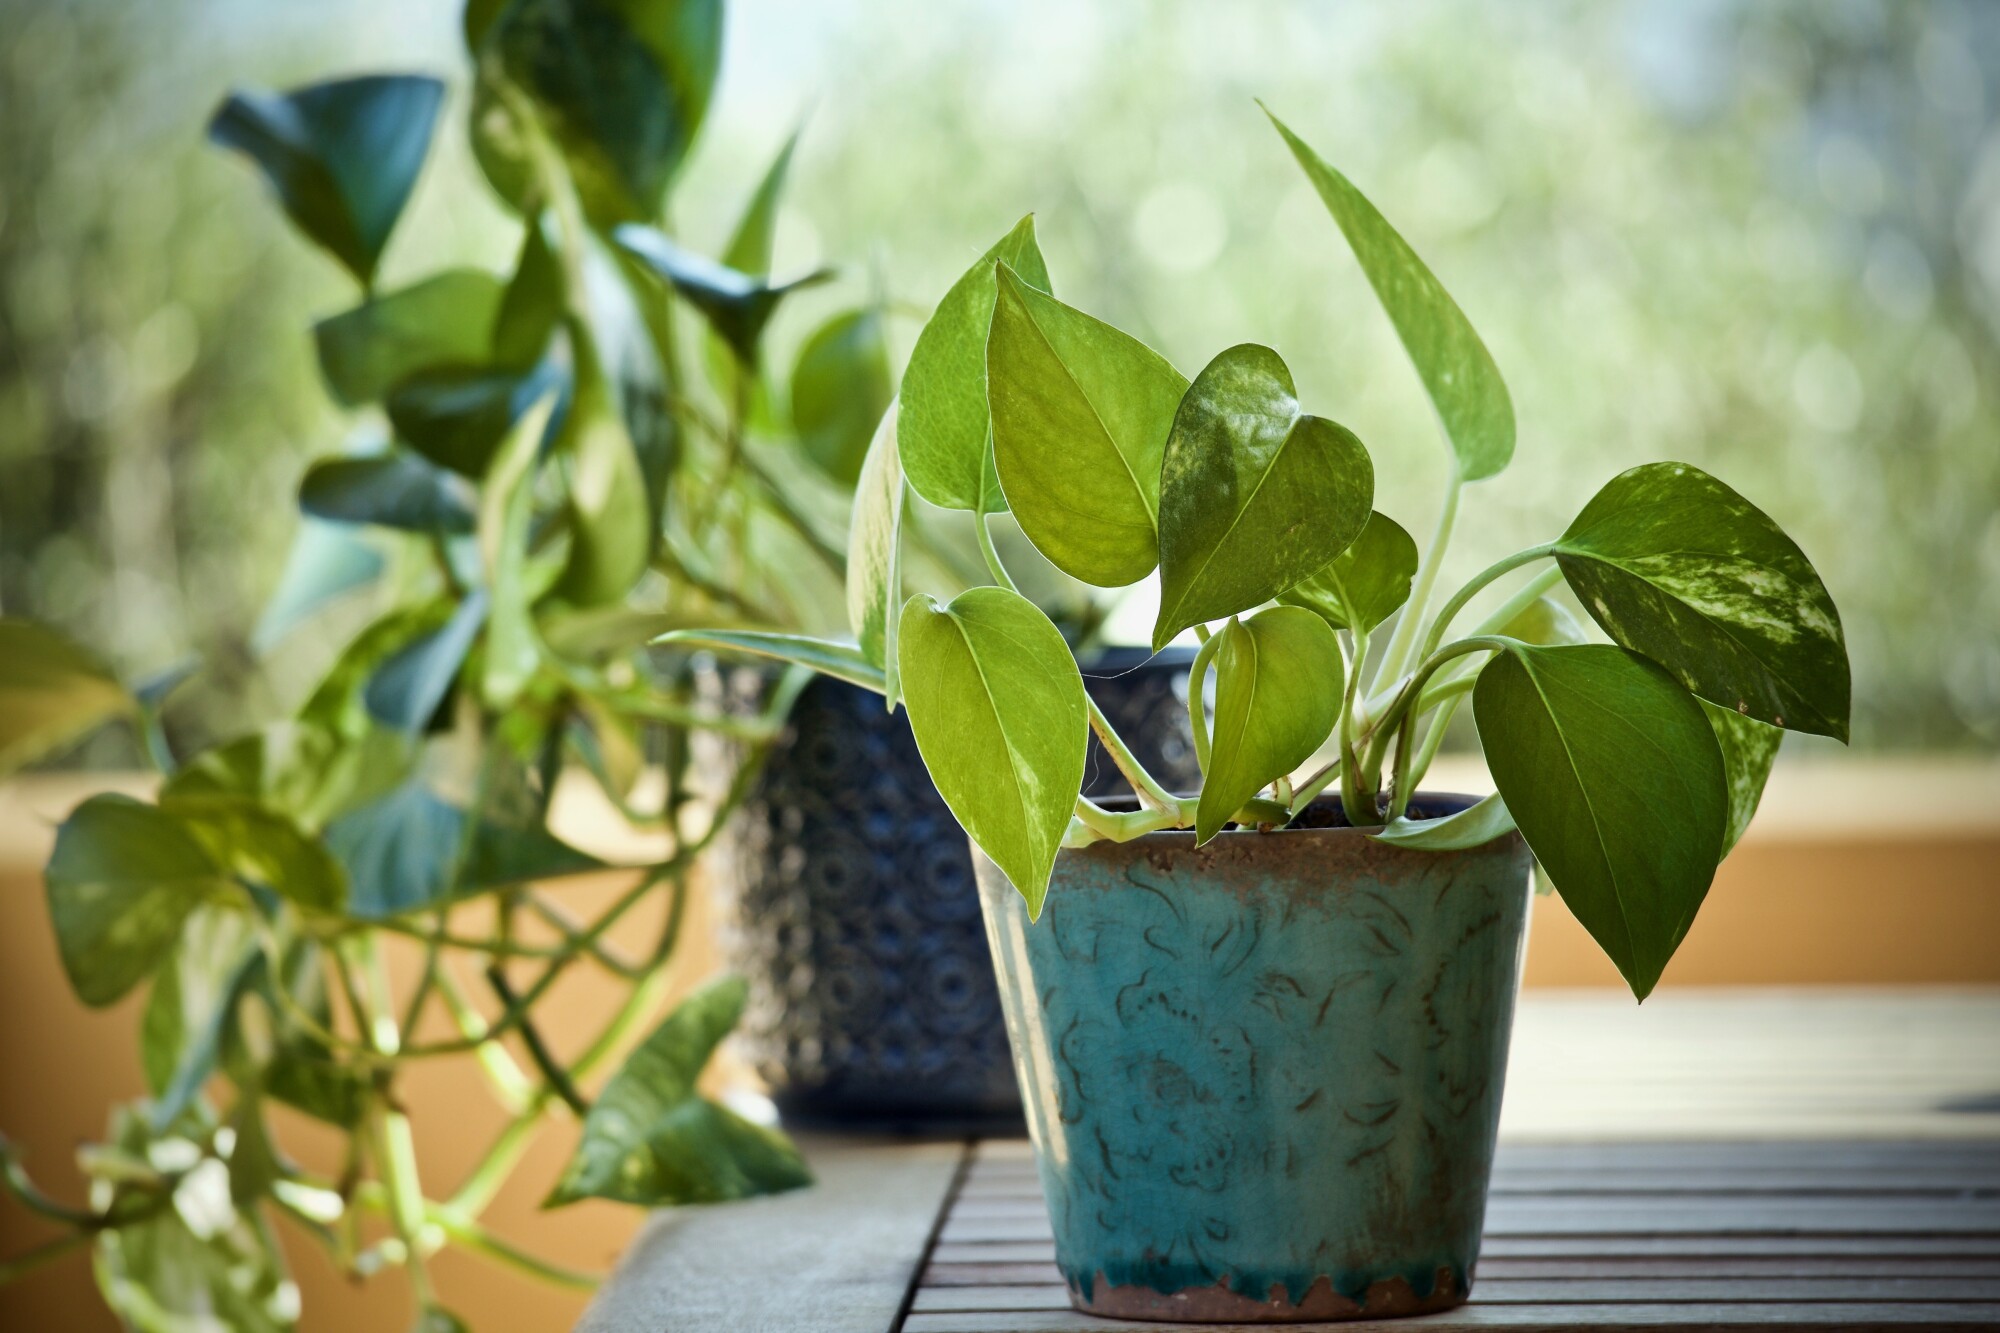 Are you thinking about growing plants indoors? Do you want to know how to grow indoor plants? Read on to learn how to do it the right way.